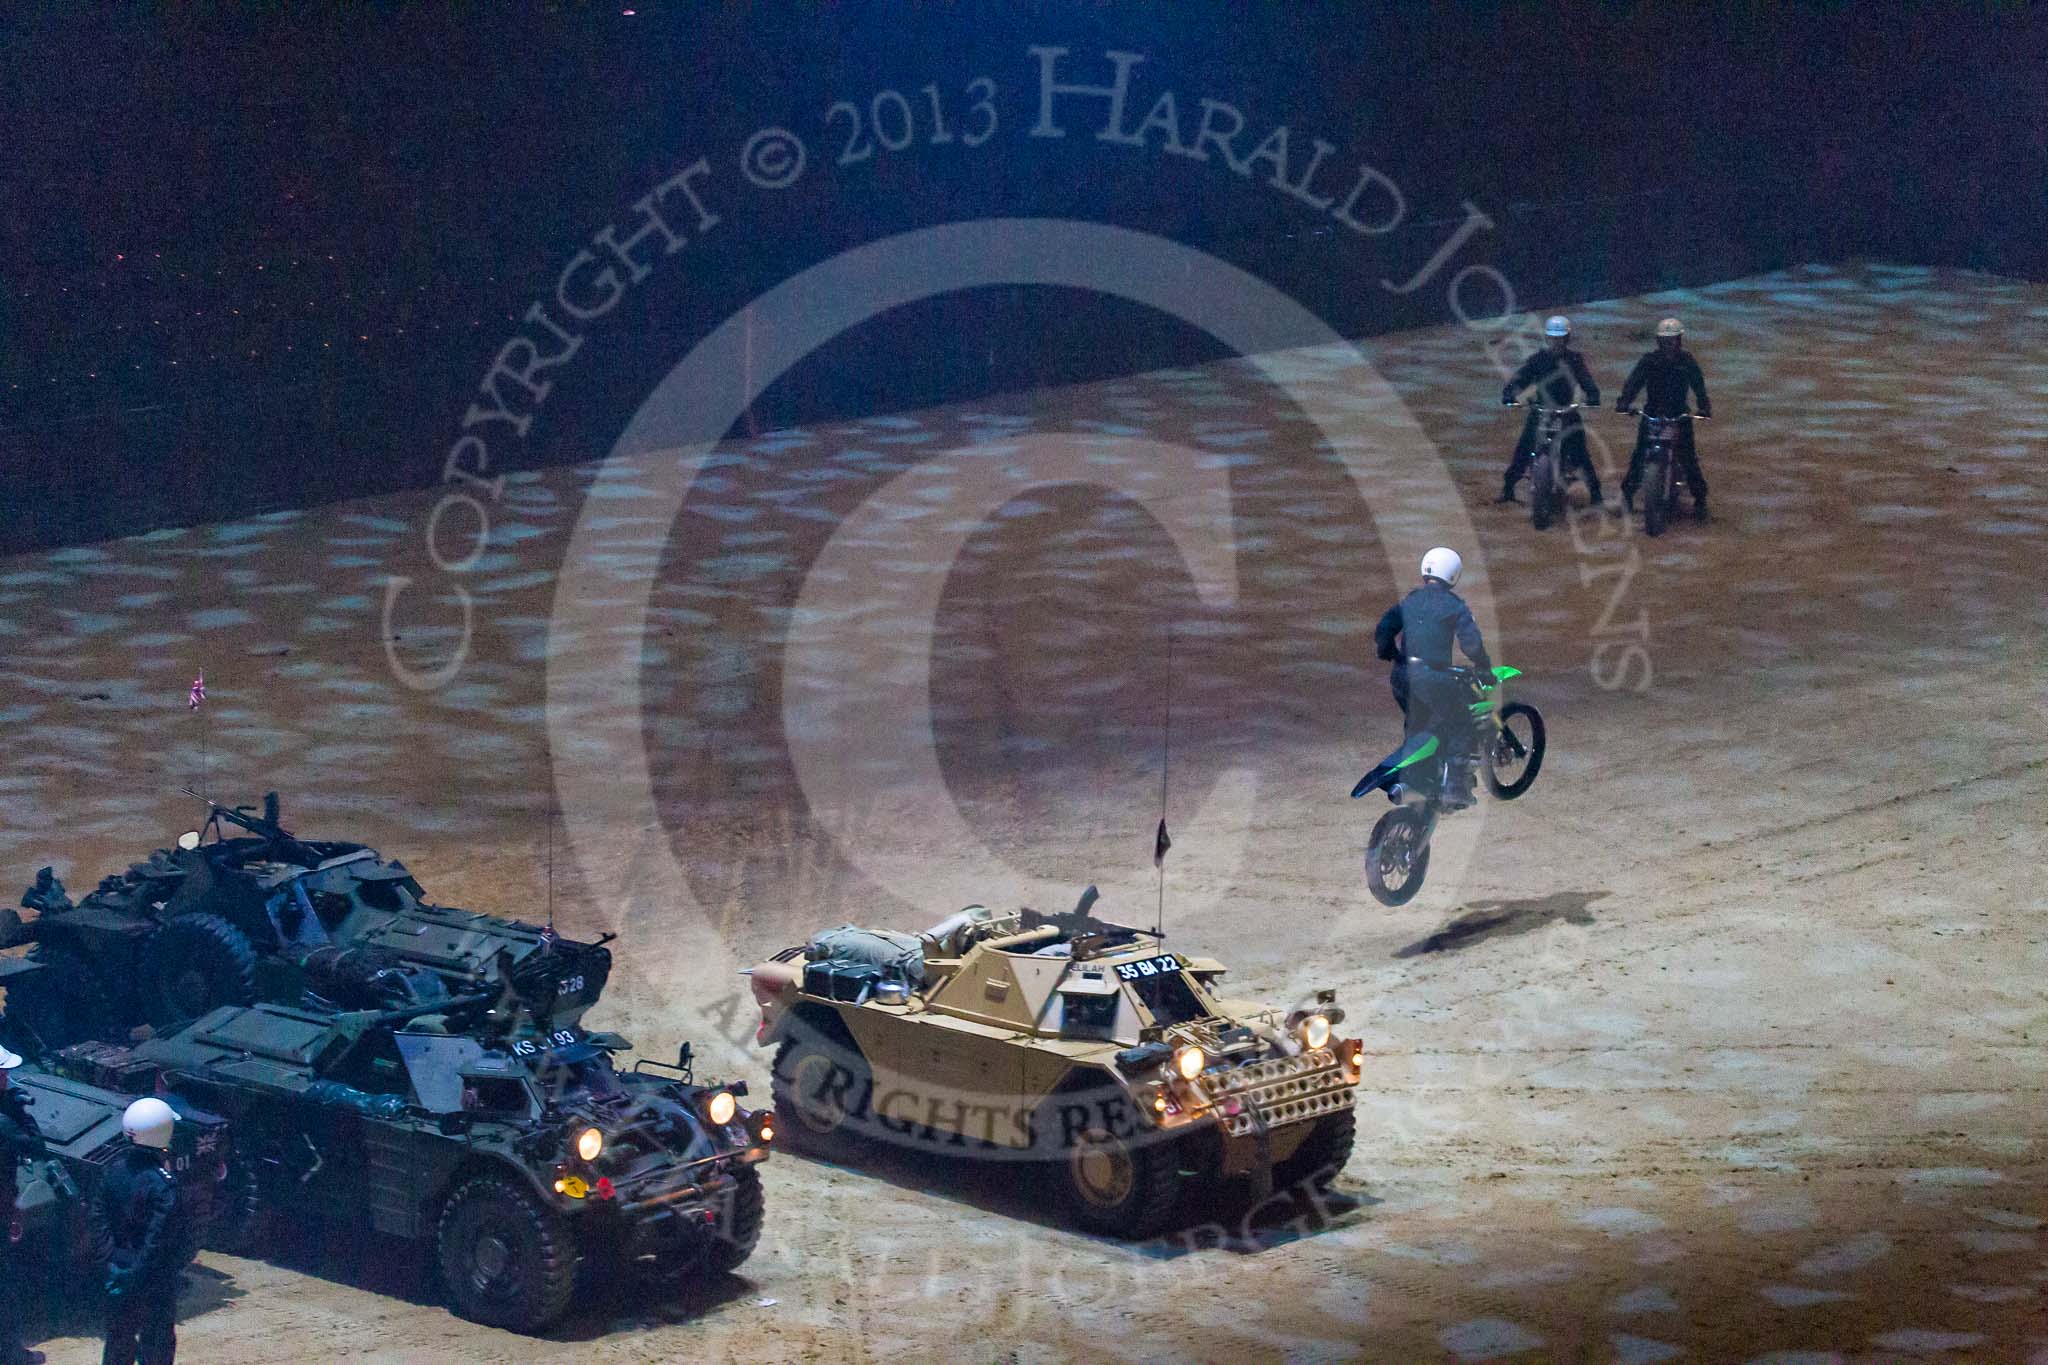 British Military Tournament 2013.
Earls Court,
London SW5,

United Kingdom,
on 06 December 2013 at 15:16, image #168